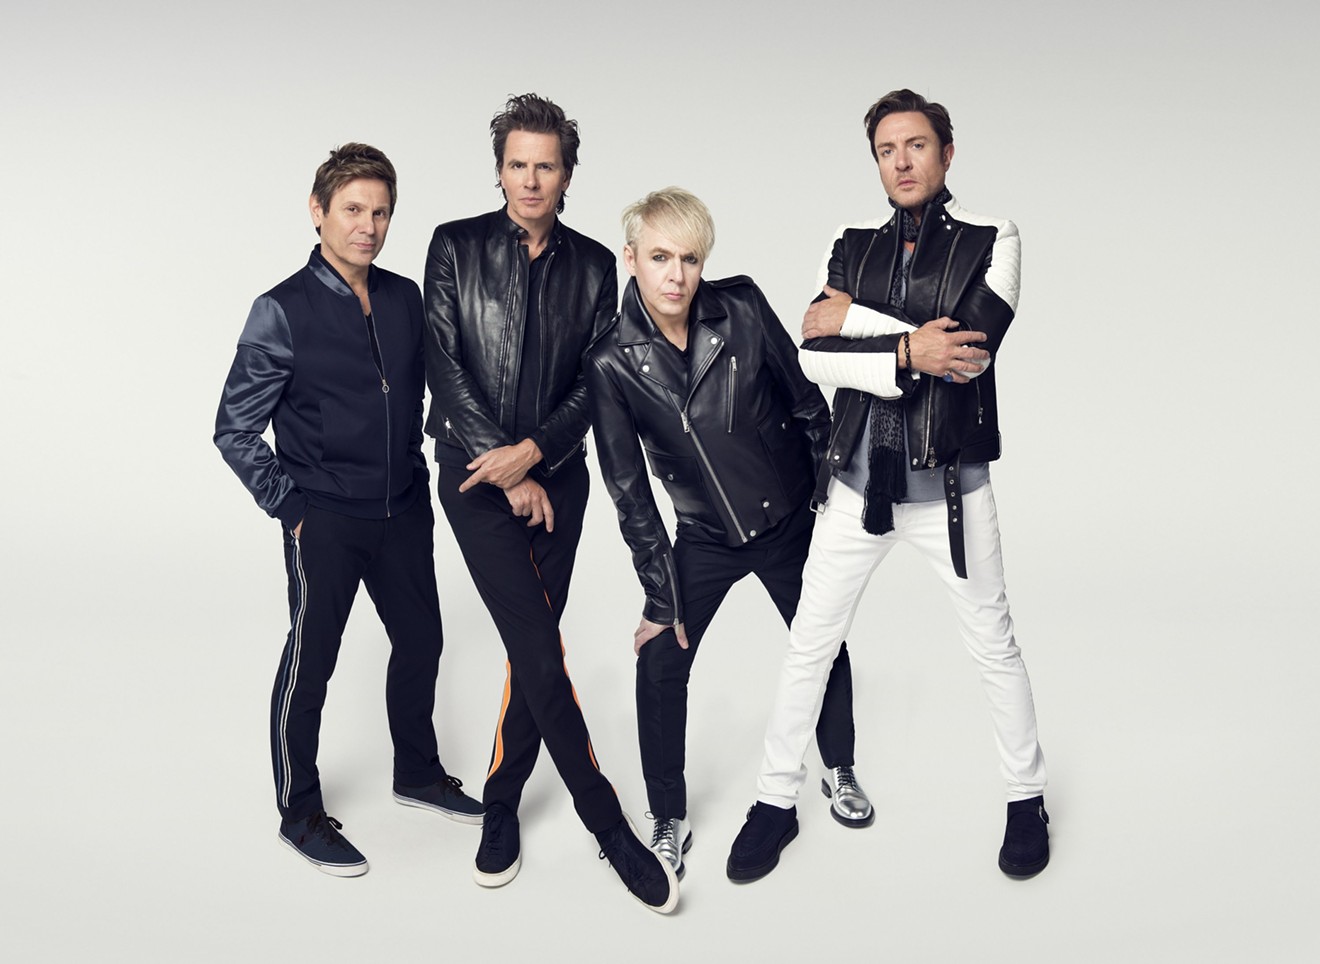 Two years ago, Duran Duran released its highest charting album in 22 years. We spoke with bassist John Taylor (second from left) about that feat.